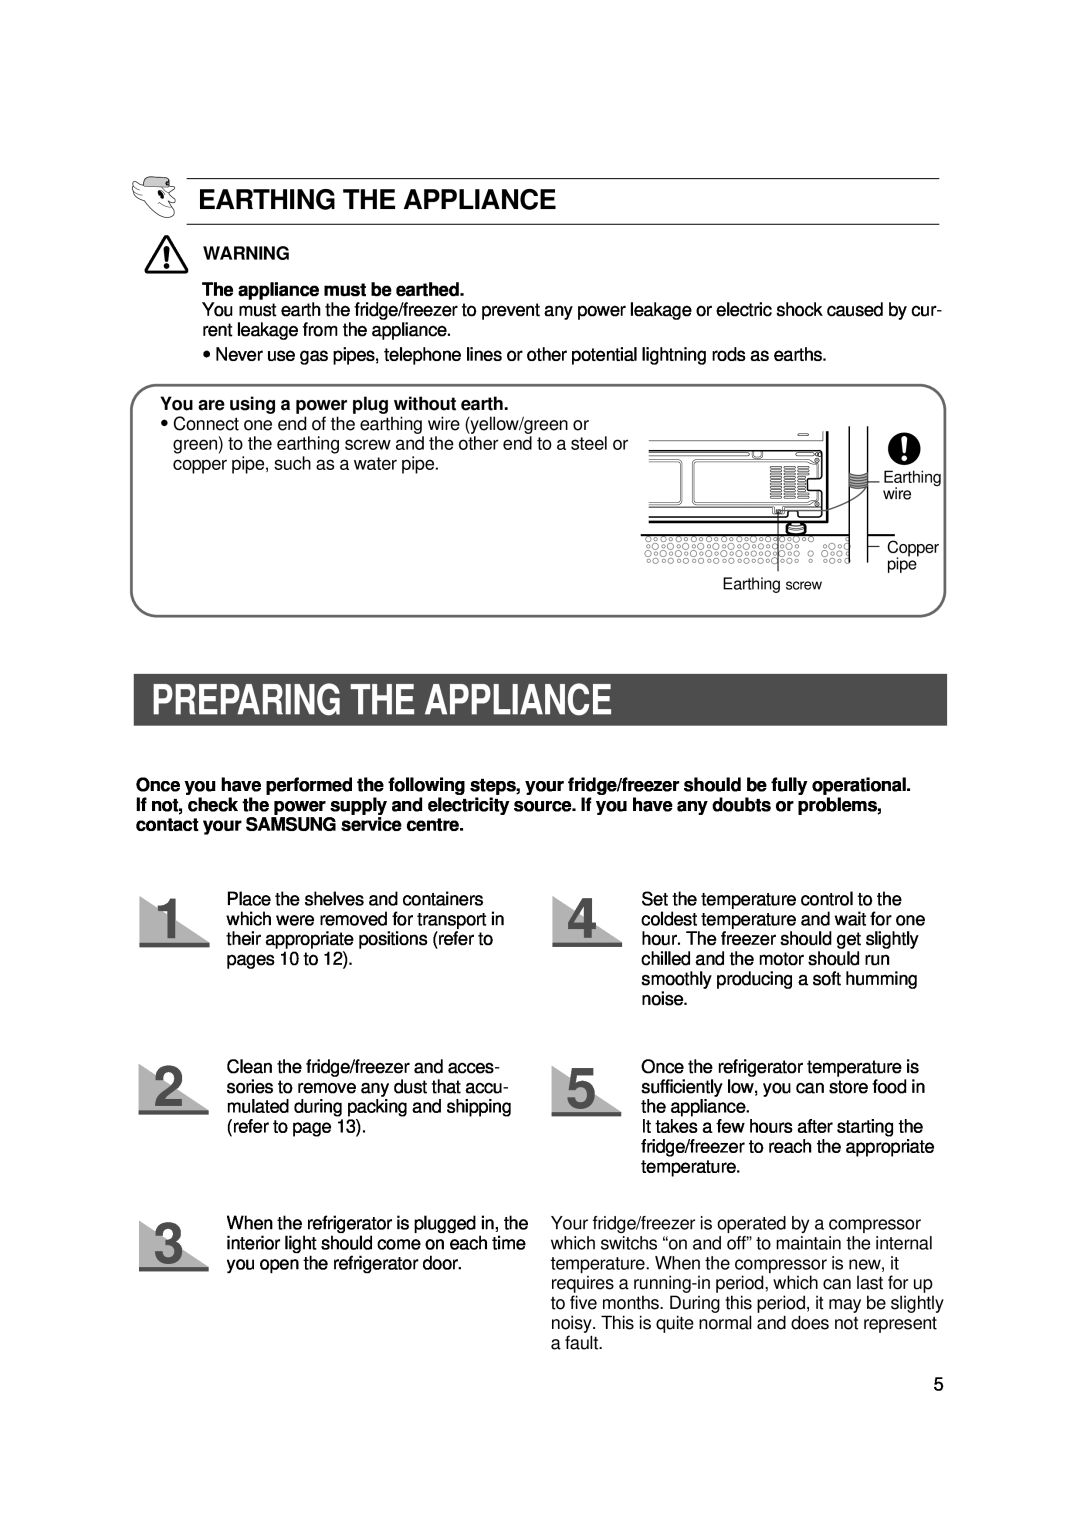 Samsung SR-S20, SR-S22 user manual Preparing The Appliance, Earthing The Appliance, The appliance must be earthed 